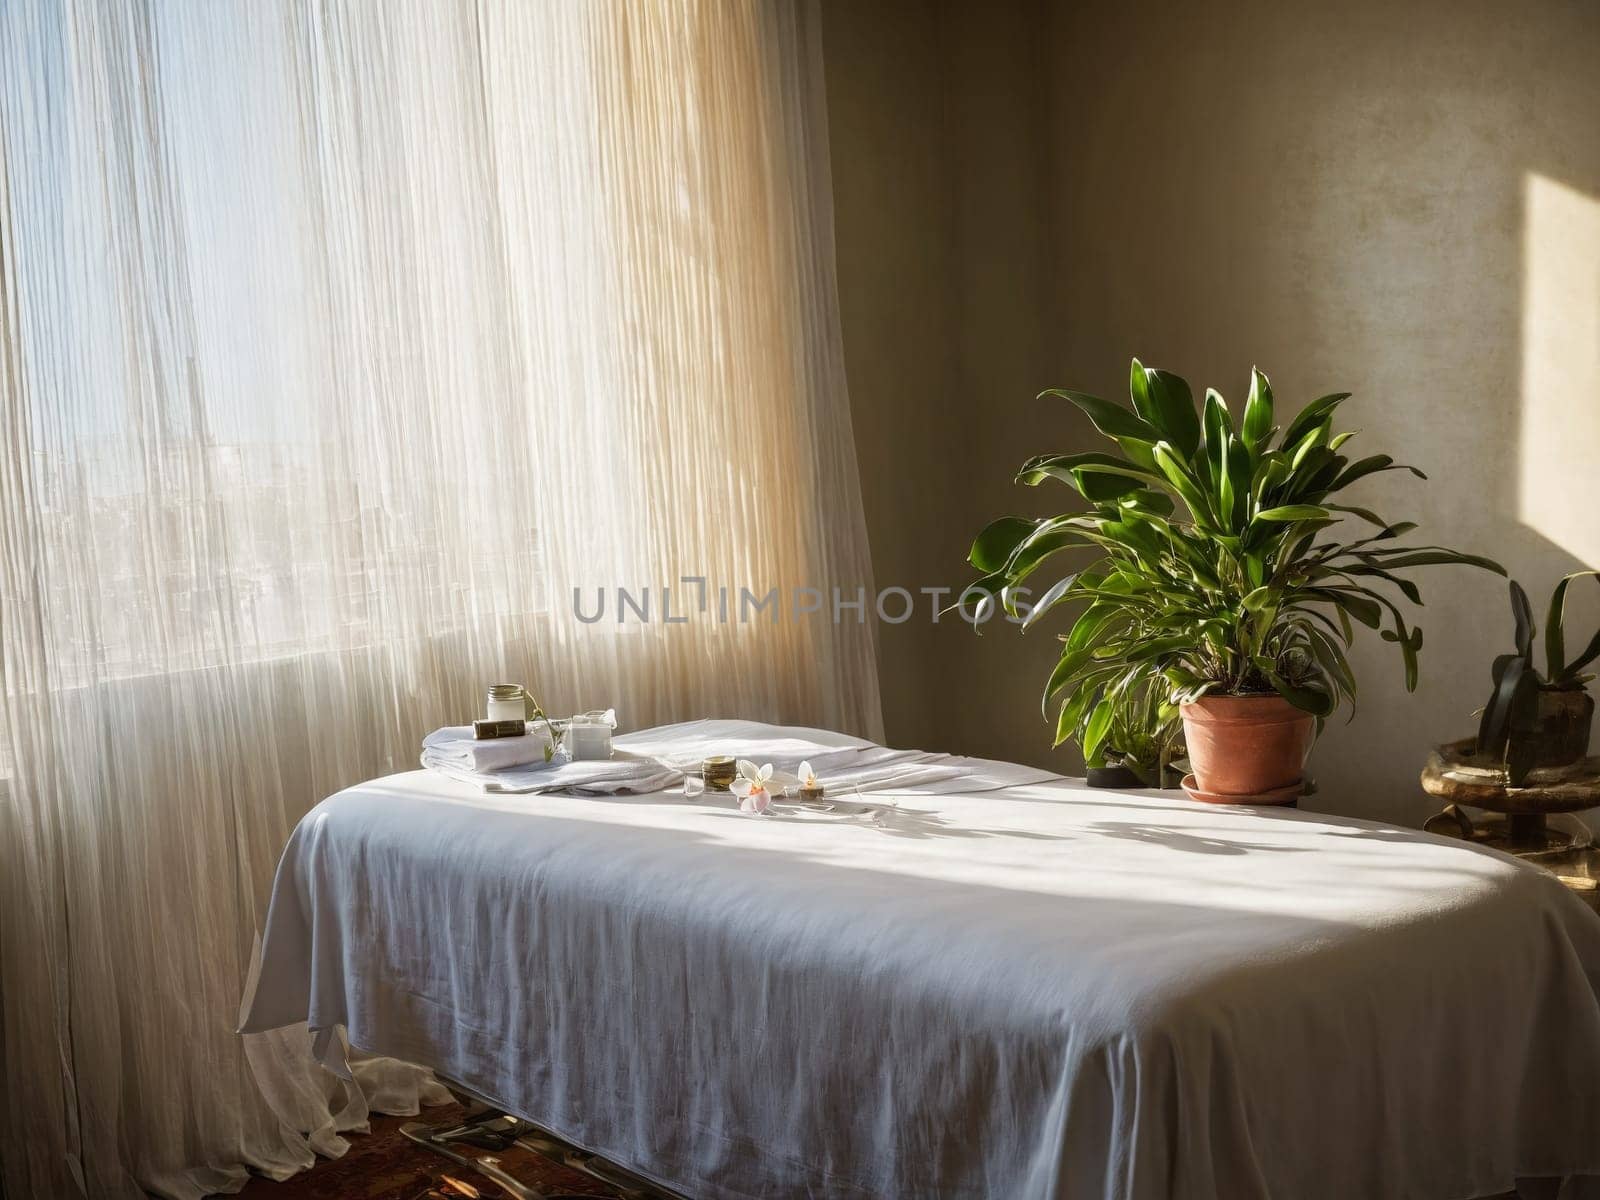 Sunlit esthetician s treatment room crisp linens on massage table potted orchid sheer curtains ethereal by panophotograph